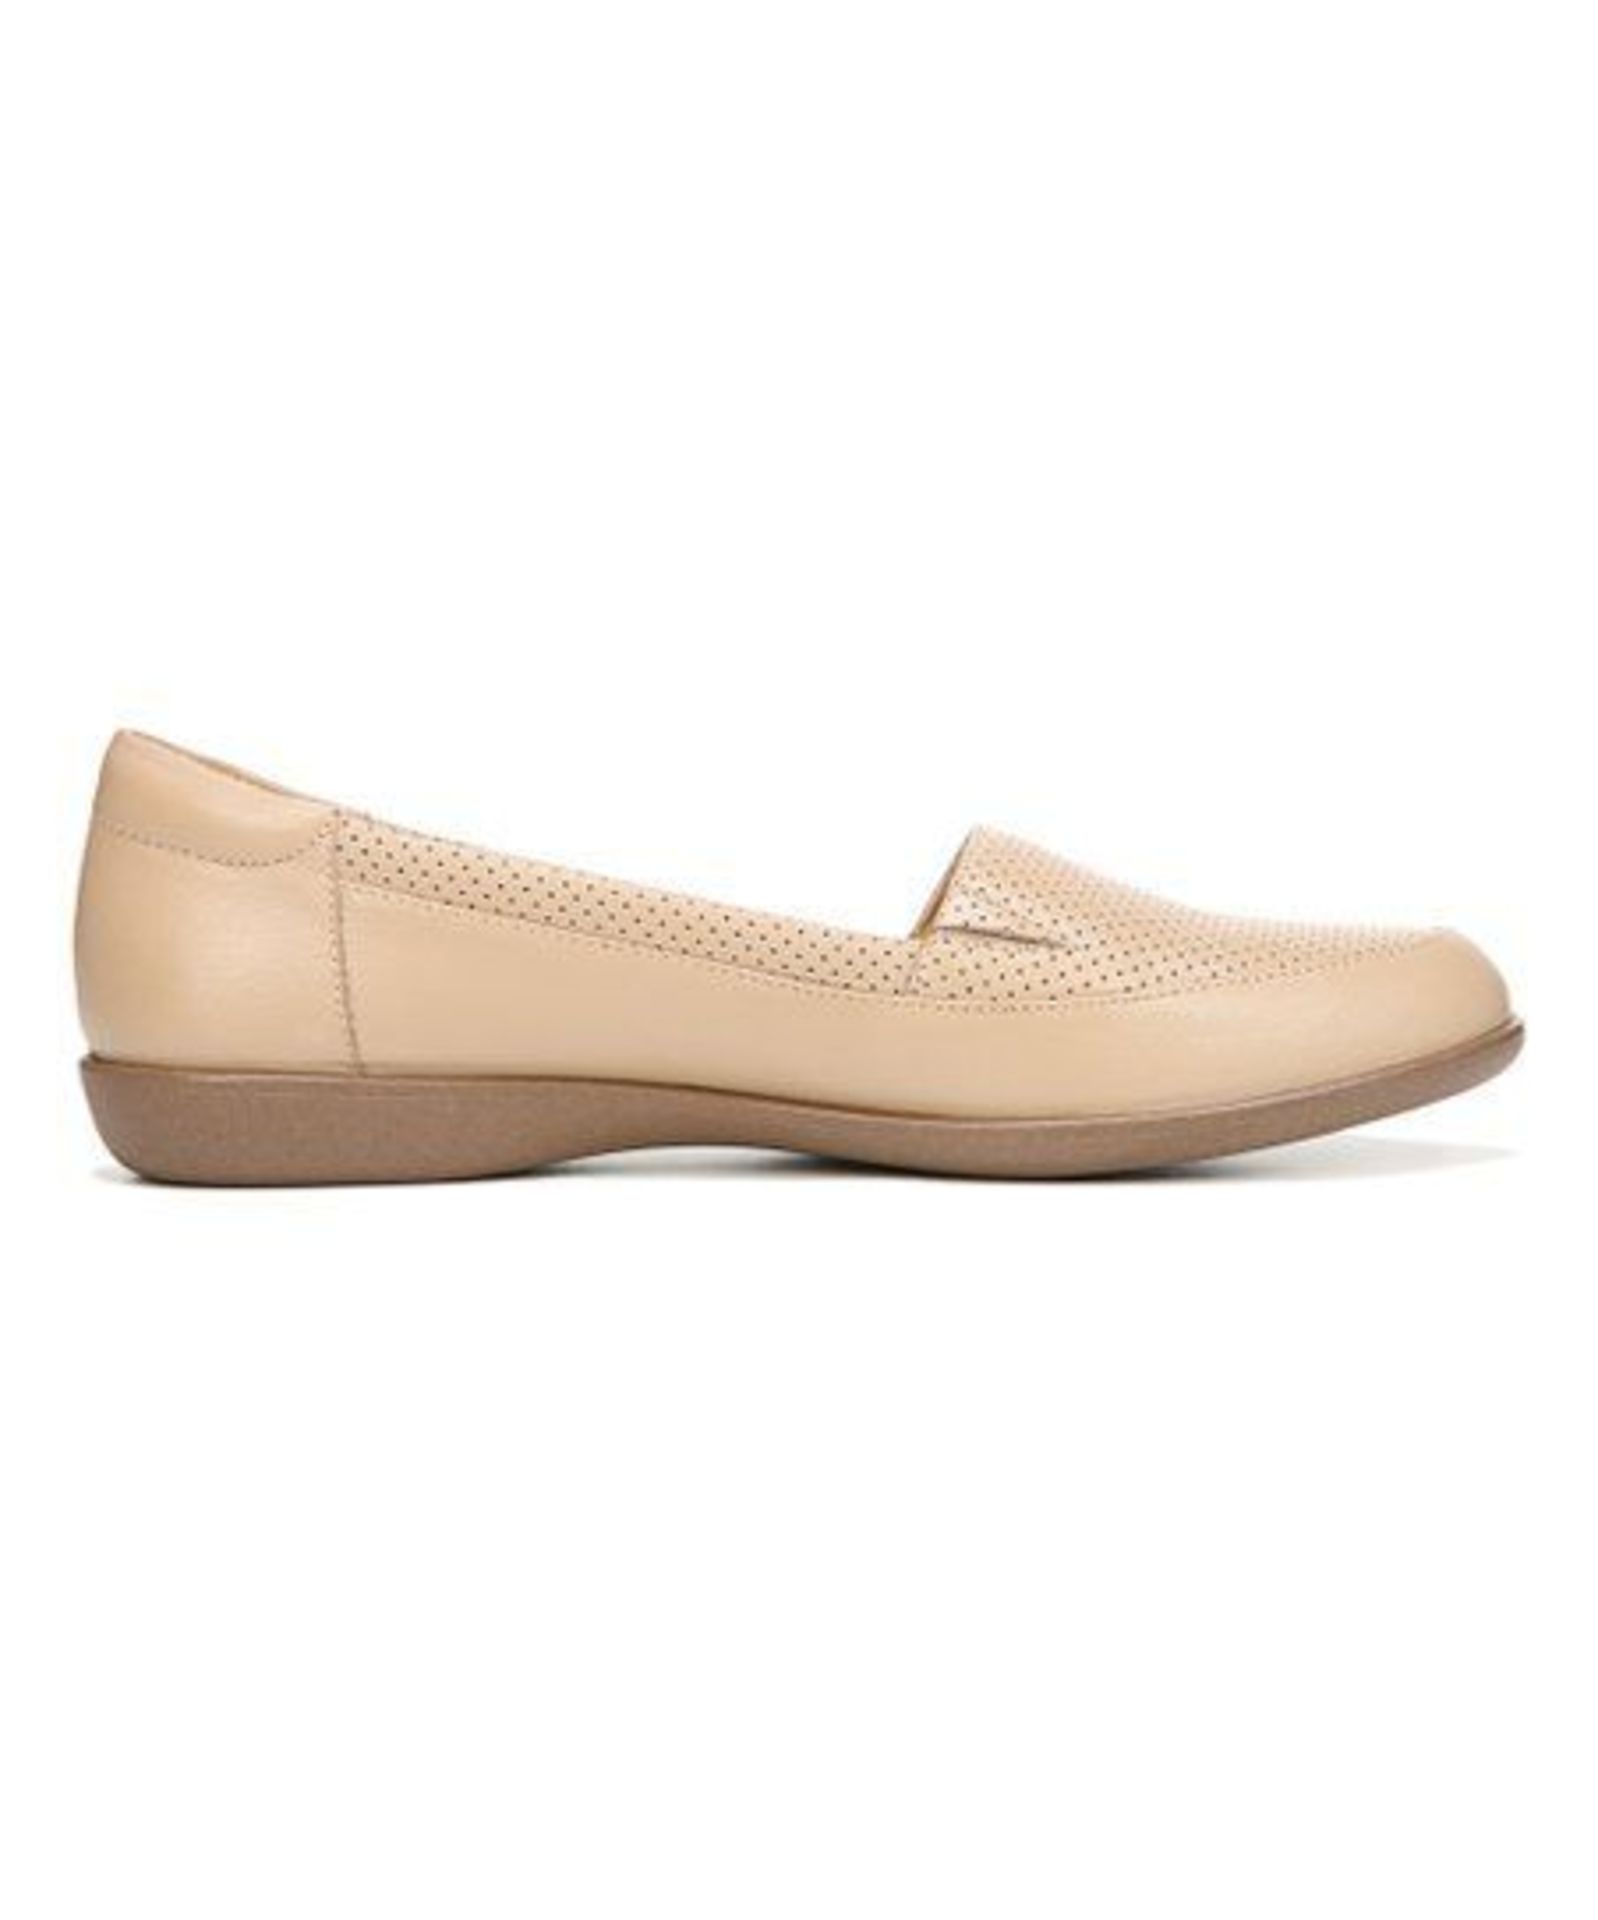 Naturalizer Nude Fuji Leather Loafer (Uk Size:3/Us Size:5) (New With Box) [Ref: 48216736-F-003] - Image 3 of 5